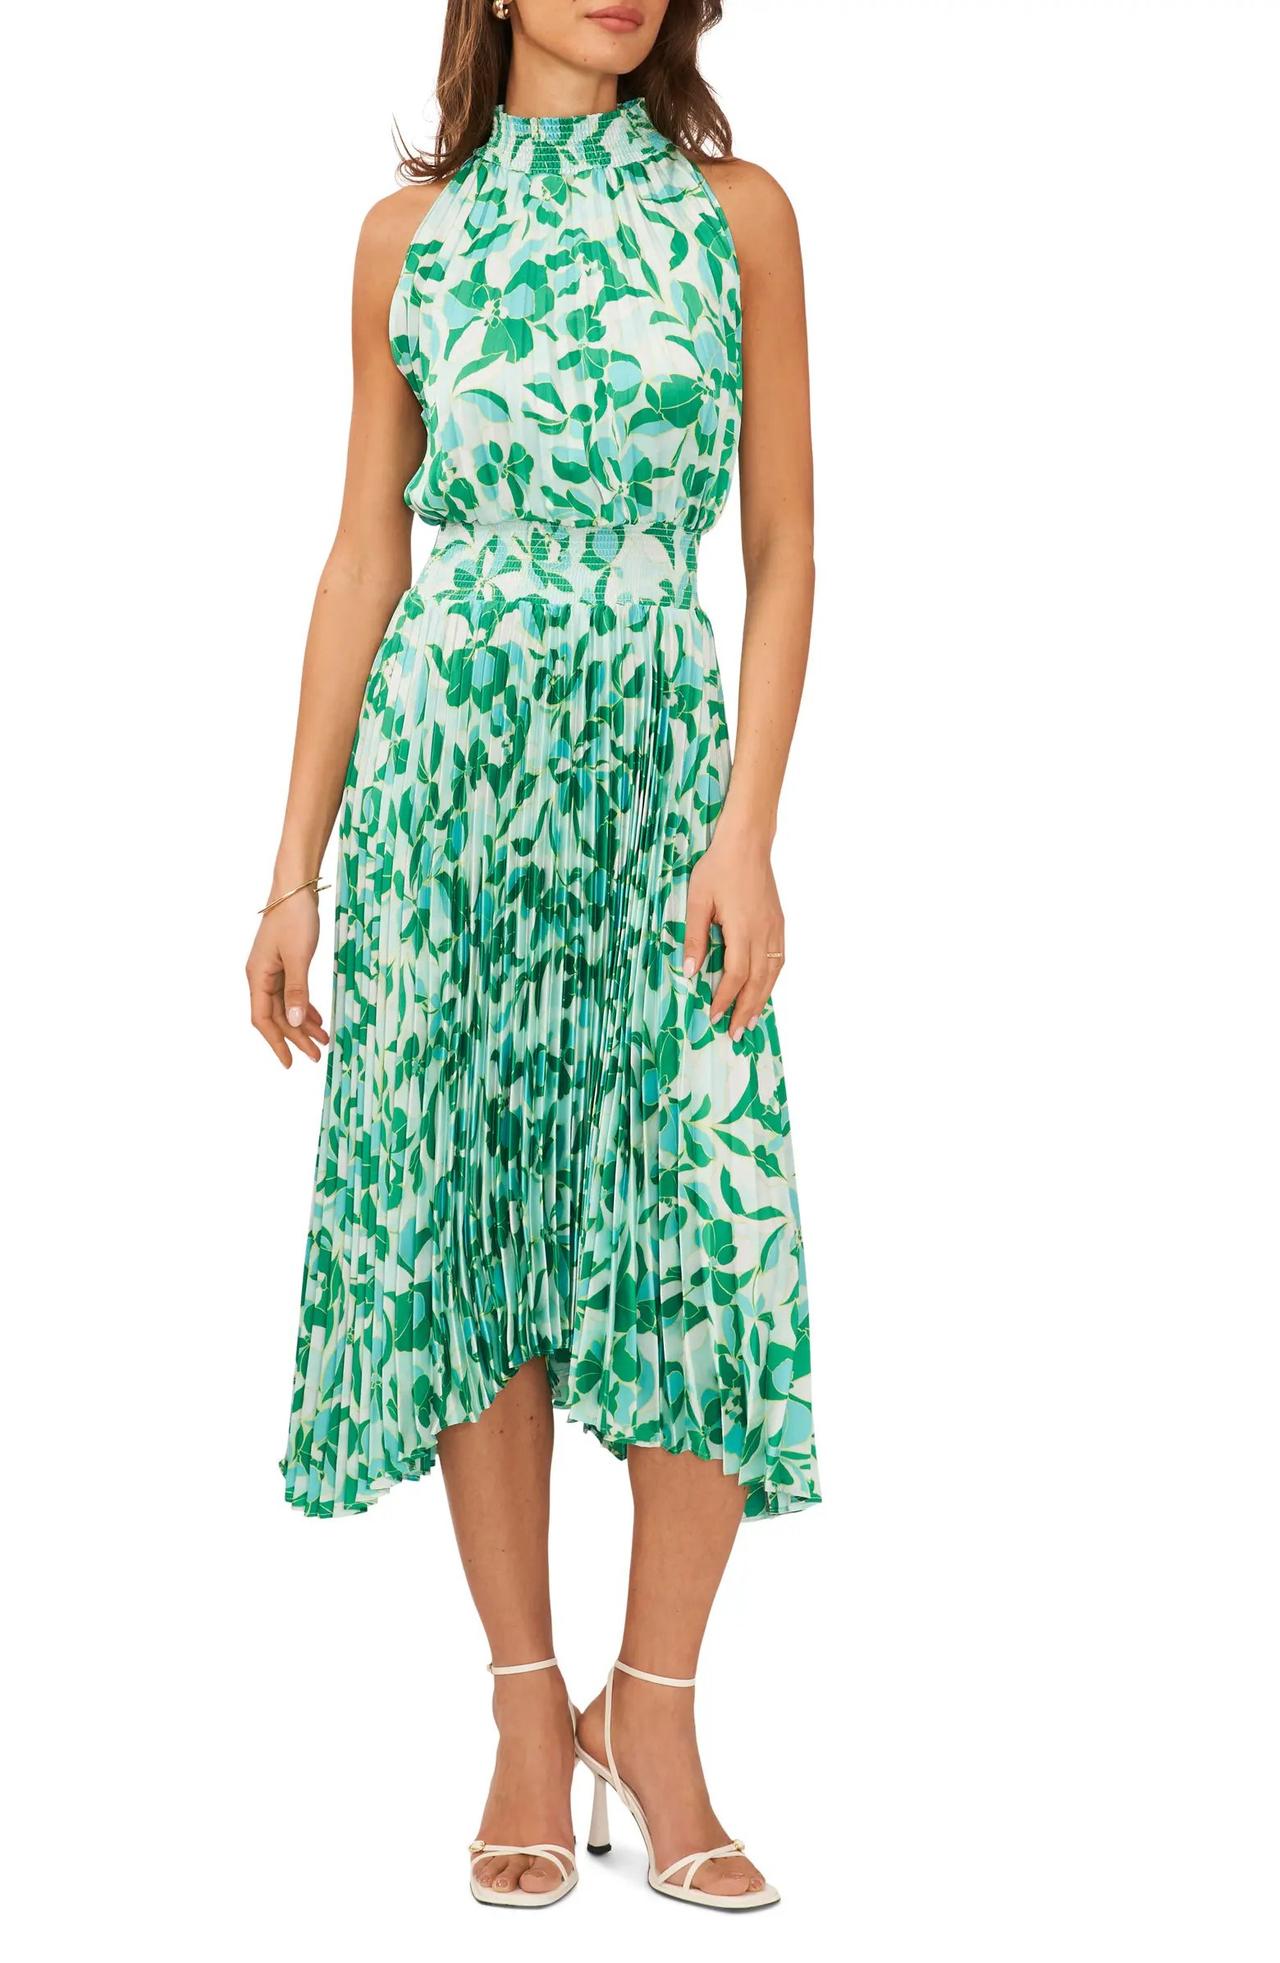 Armoire  Rent this ba&sh Short Sleeve V-Neck Tiered Ruffle Maxi Dress